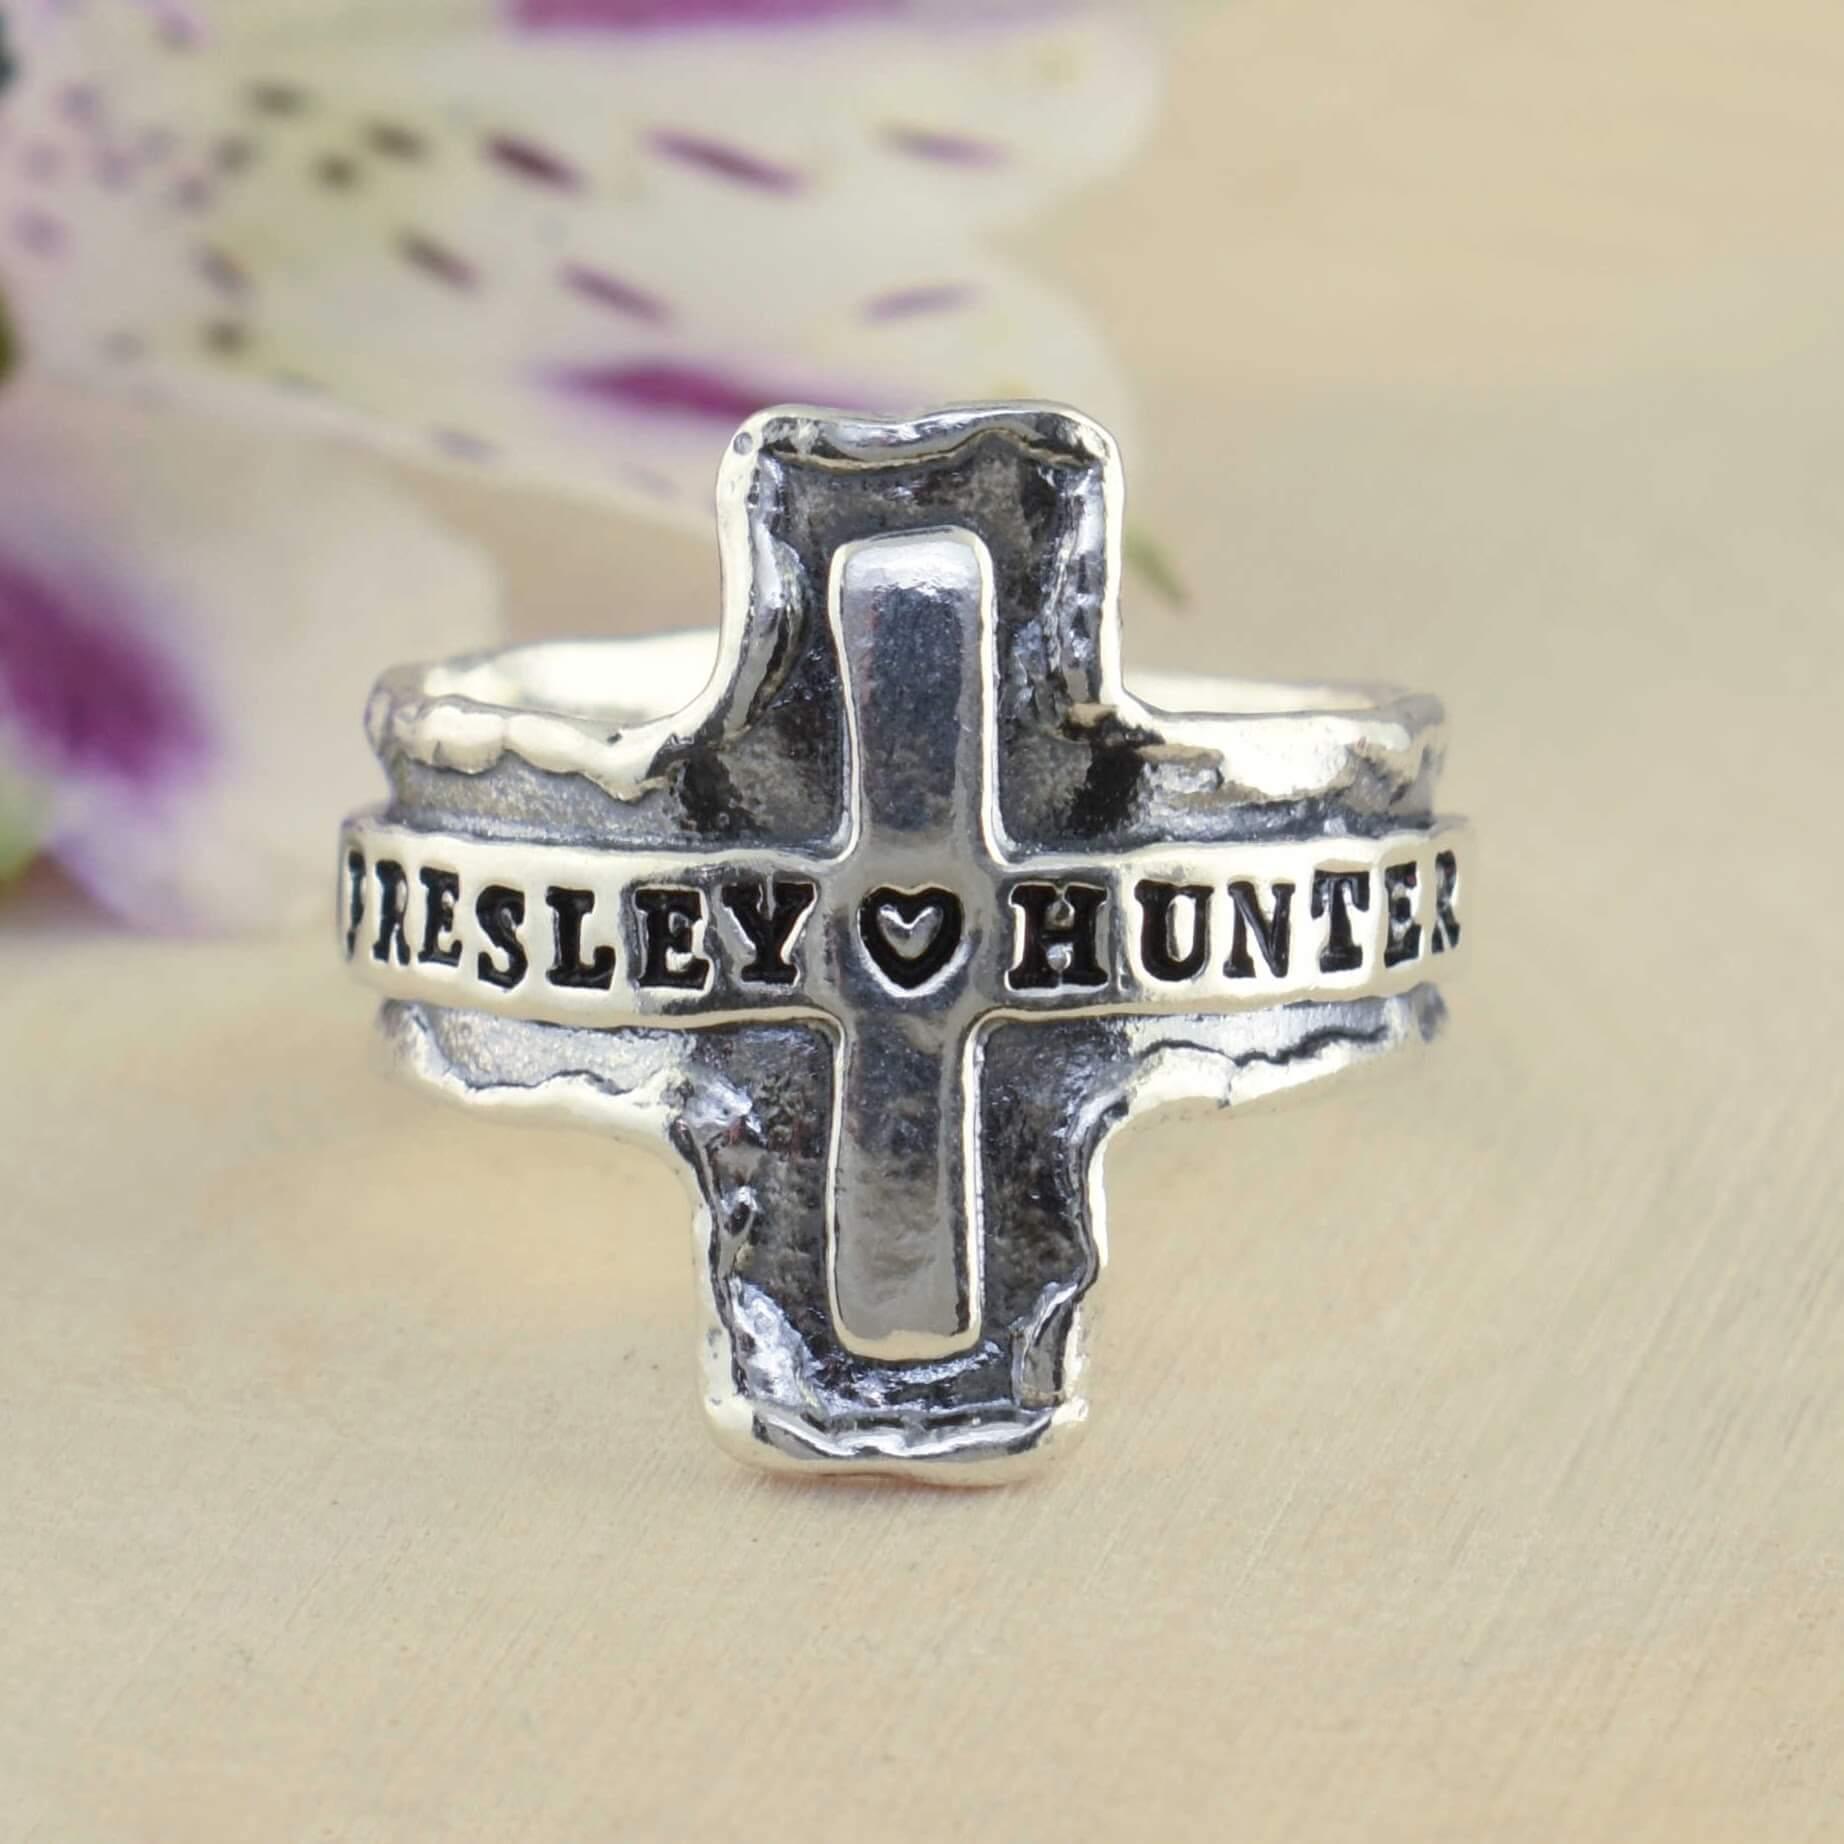 Personalized Cross Ring with stamped names